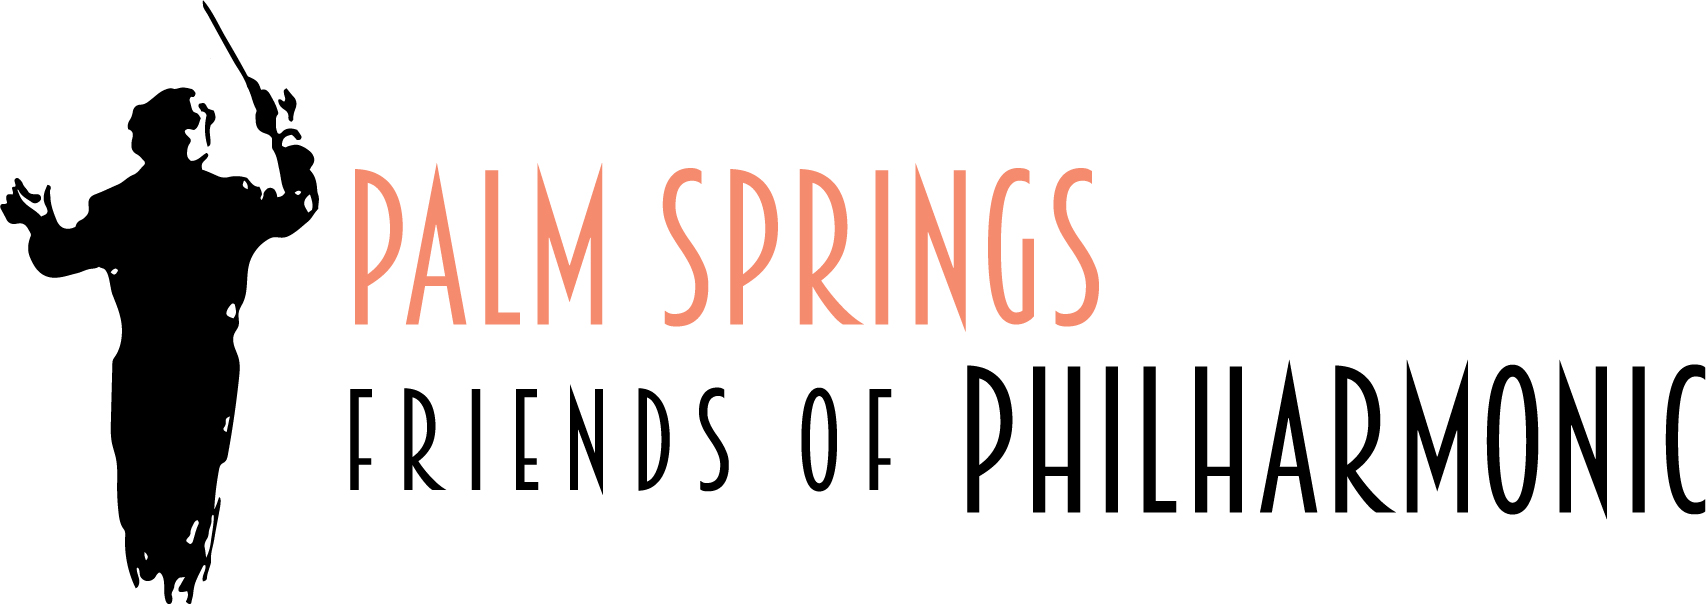 Palm Springs Friends of Philharmonic